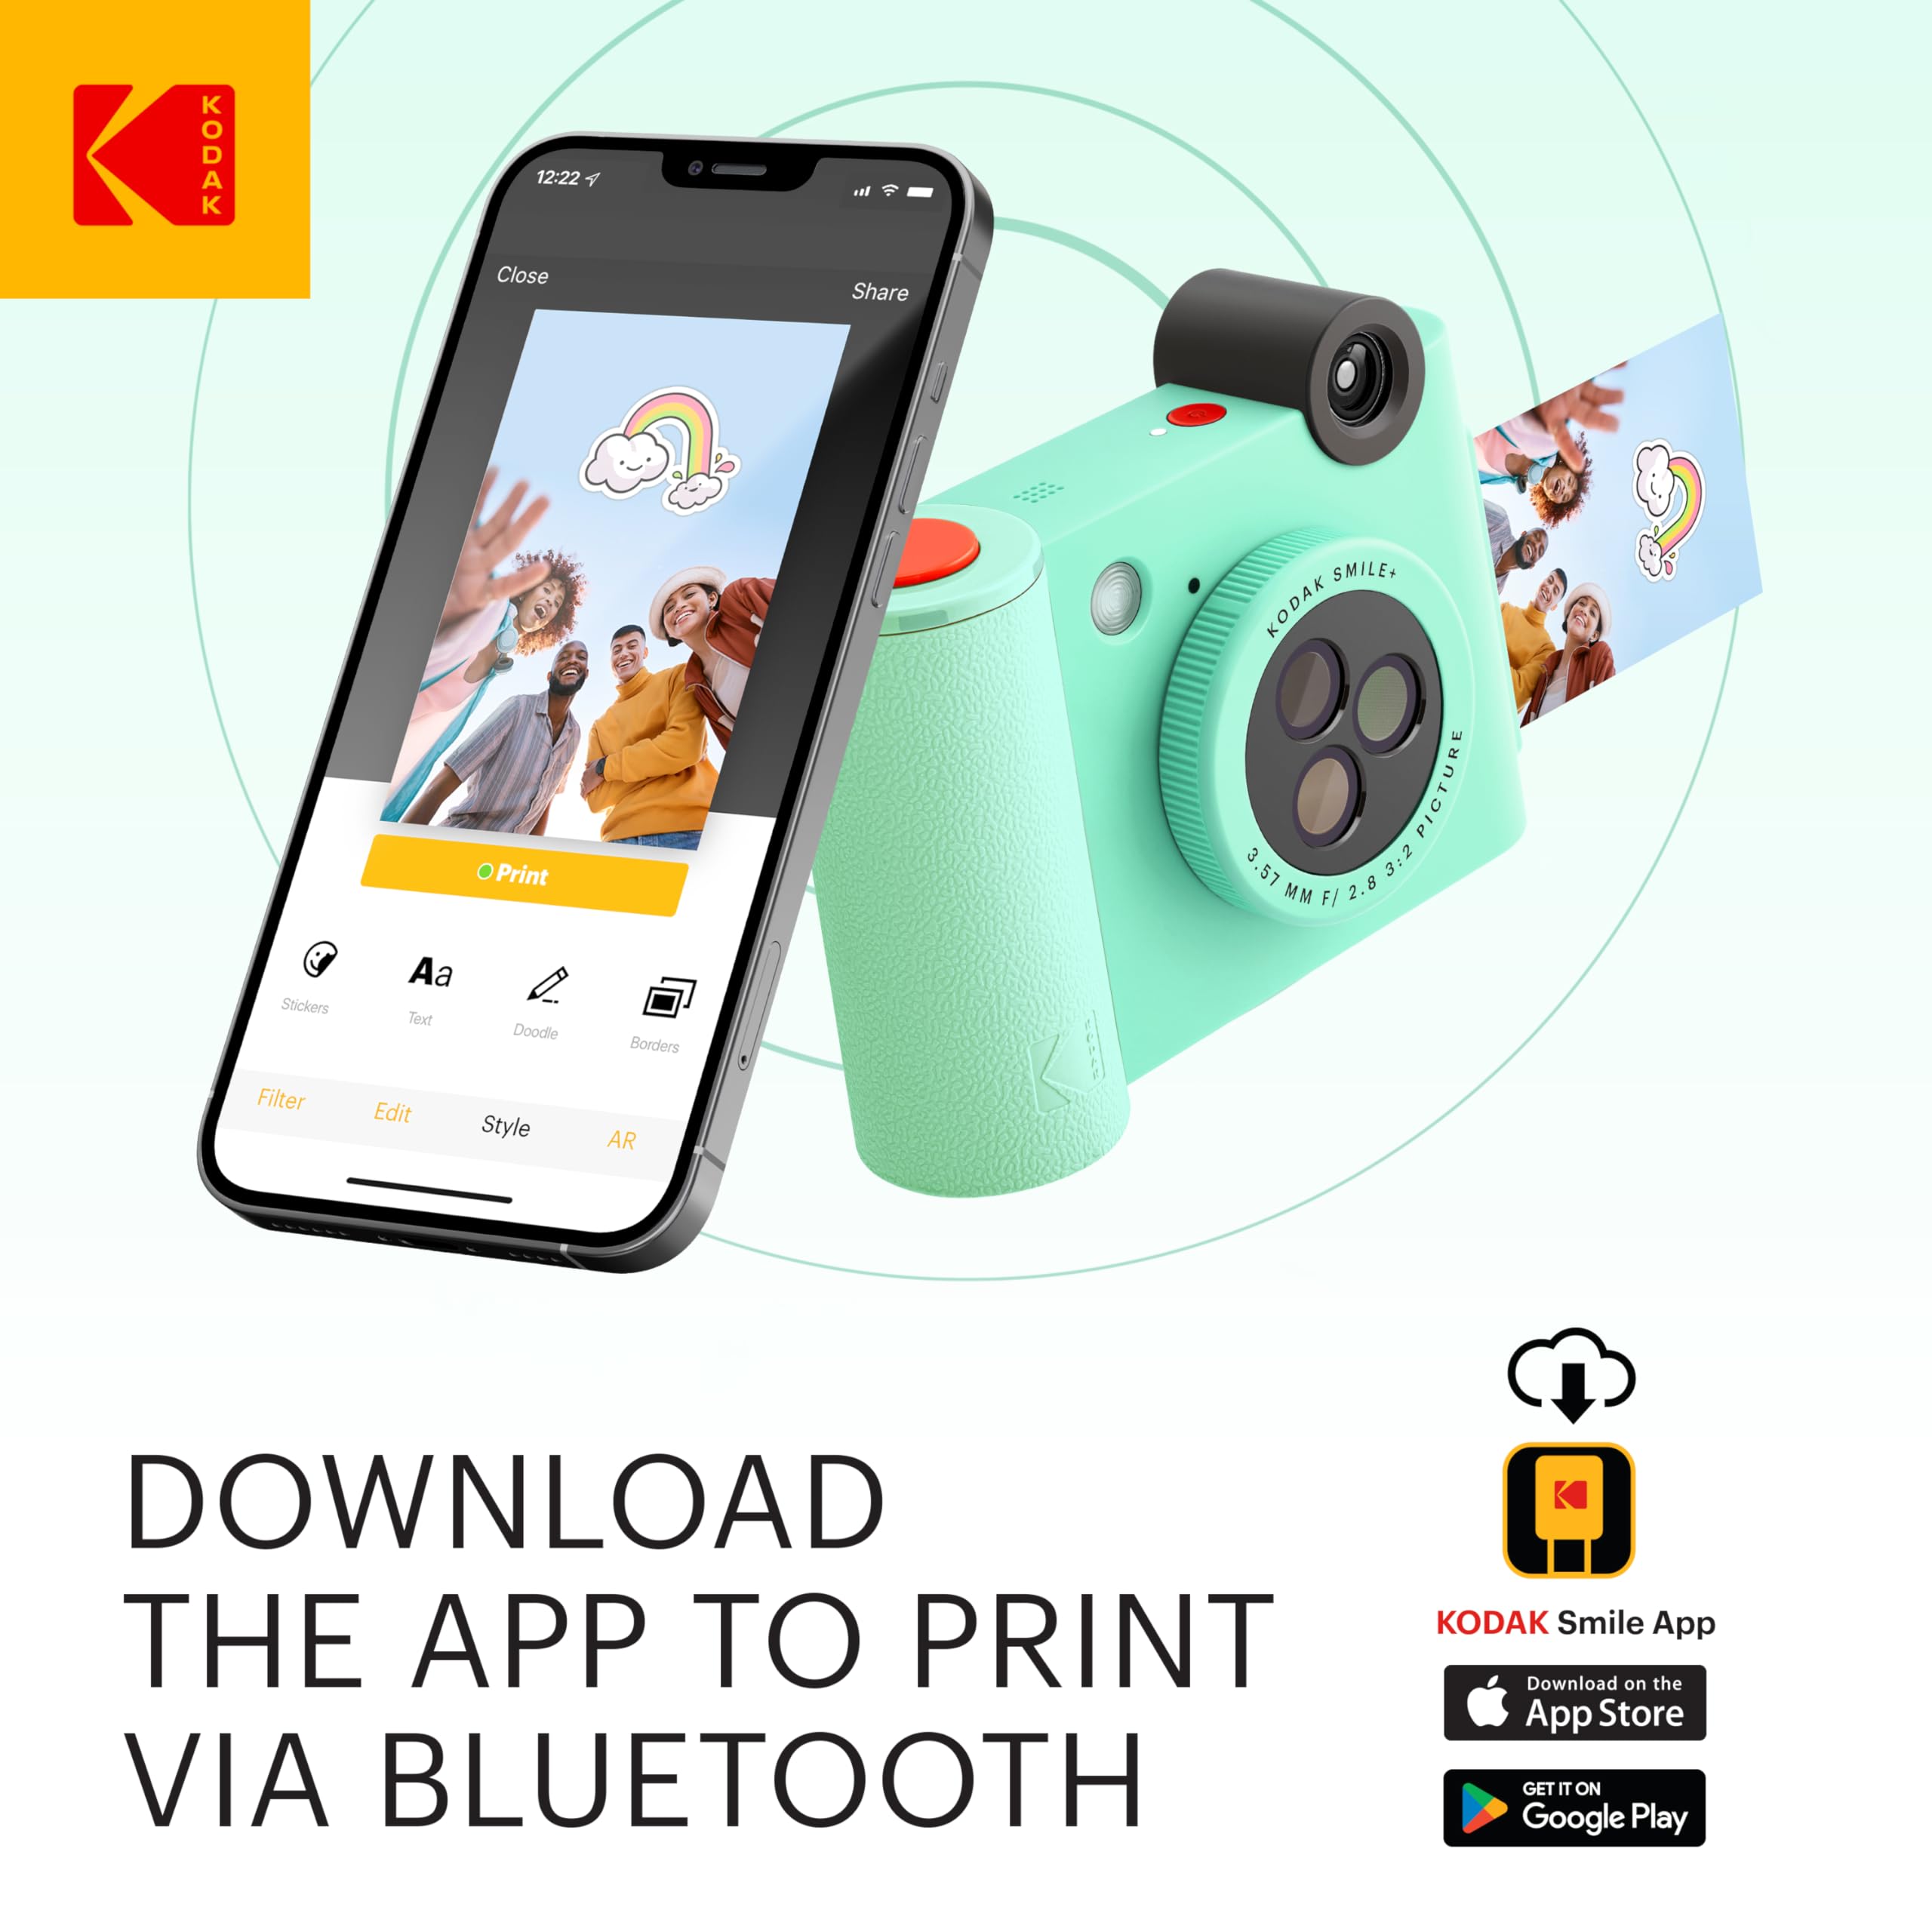 KODAK Smile+ Wireless Digital Instant Print Camera with Effect-Changing Lens, 2x3” Sticky-Backed Photo Prints, and Zink Printing Technology, Compatible with iOS and Android Devices - Green